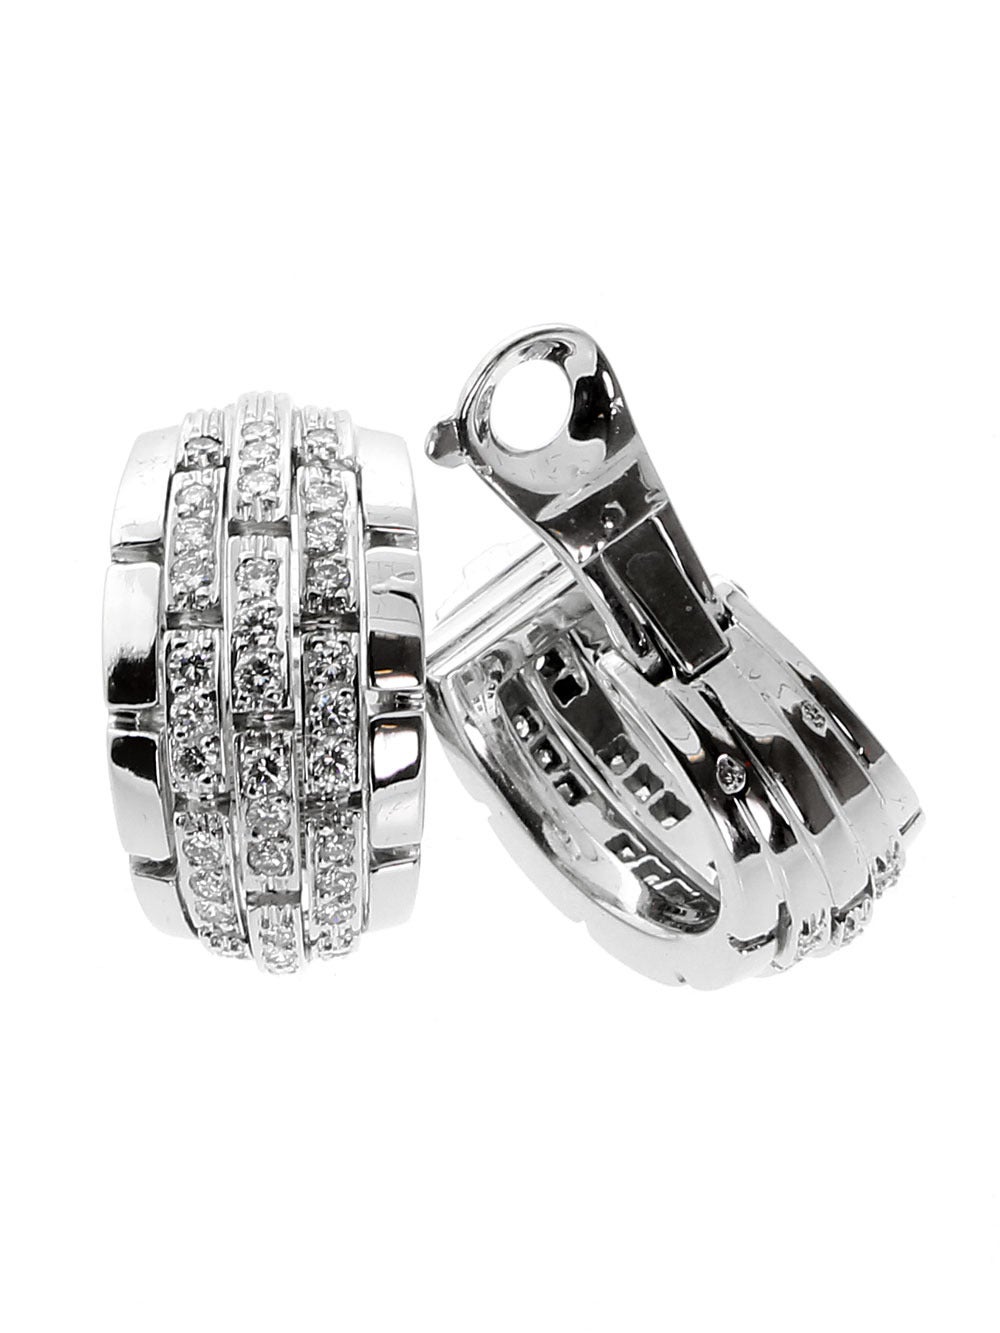 An iconic pair of Cartier Panthere earrings set with the finest Cartier round brilliant cut diamonds in 18k white gold.

Dimensions: 13mm wide (.51 Inches) by 22.5mm in length (.88 Inches)

Inventory ID: 0000080